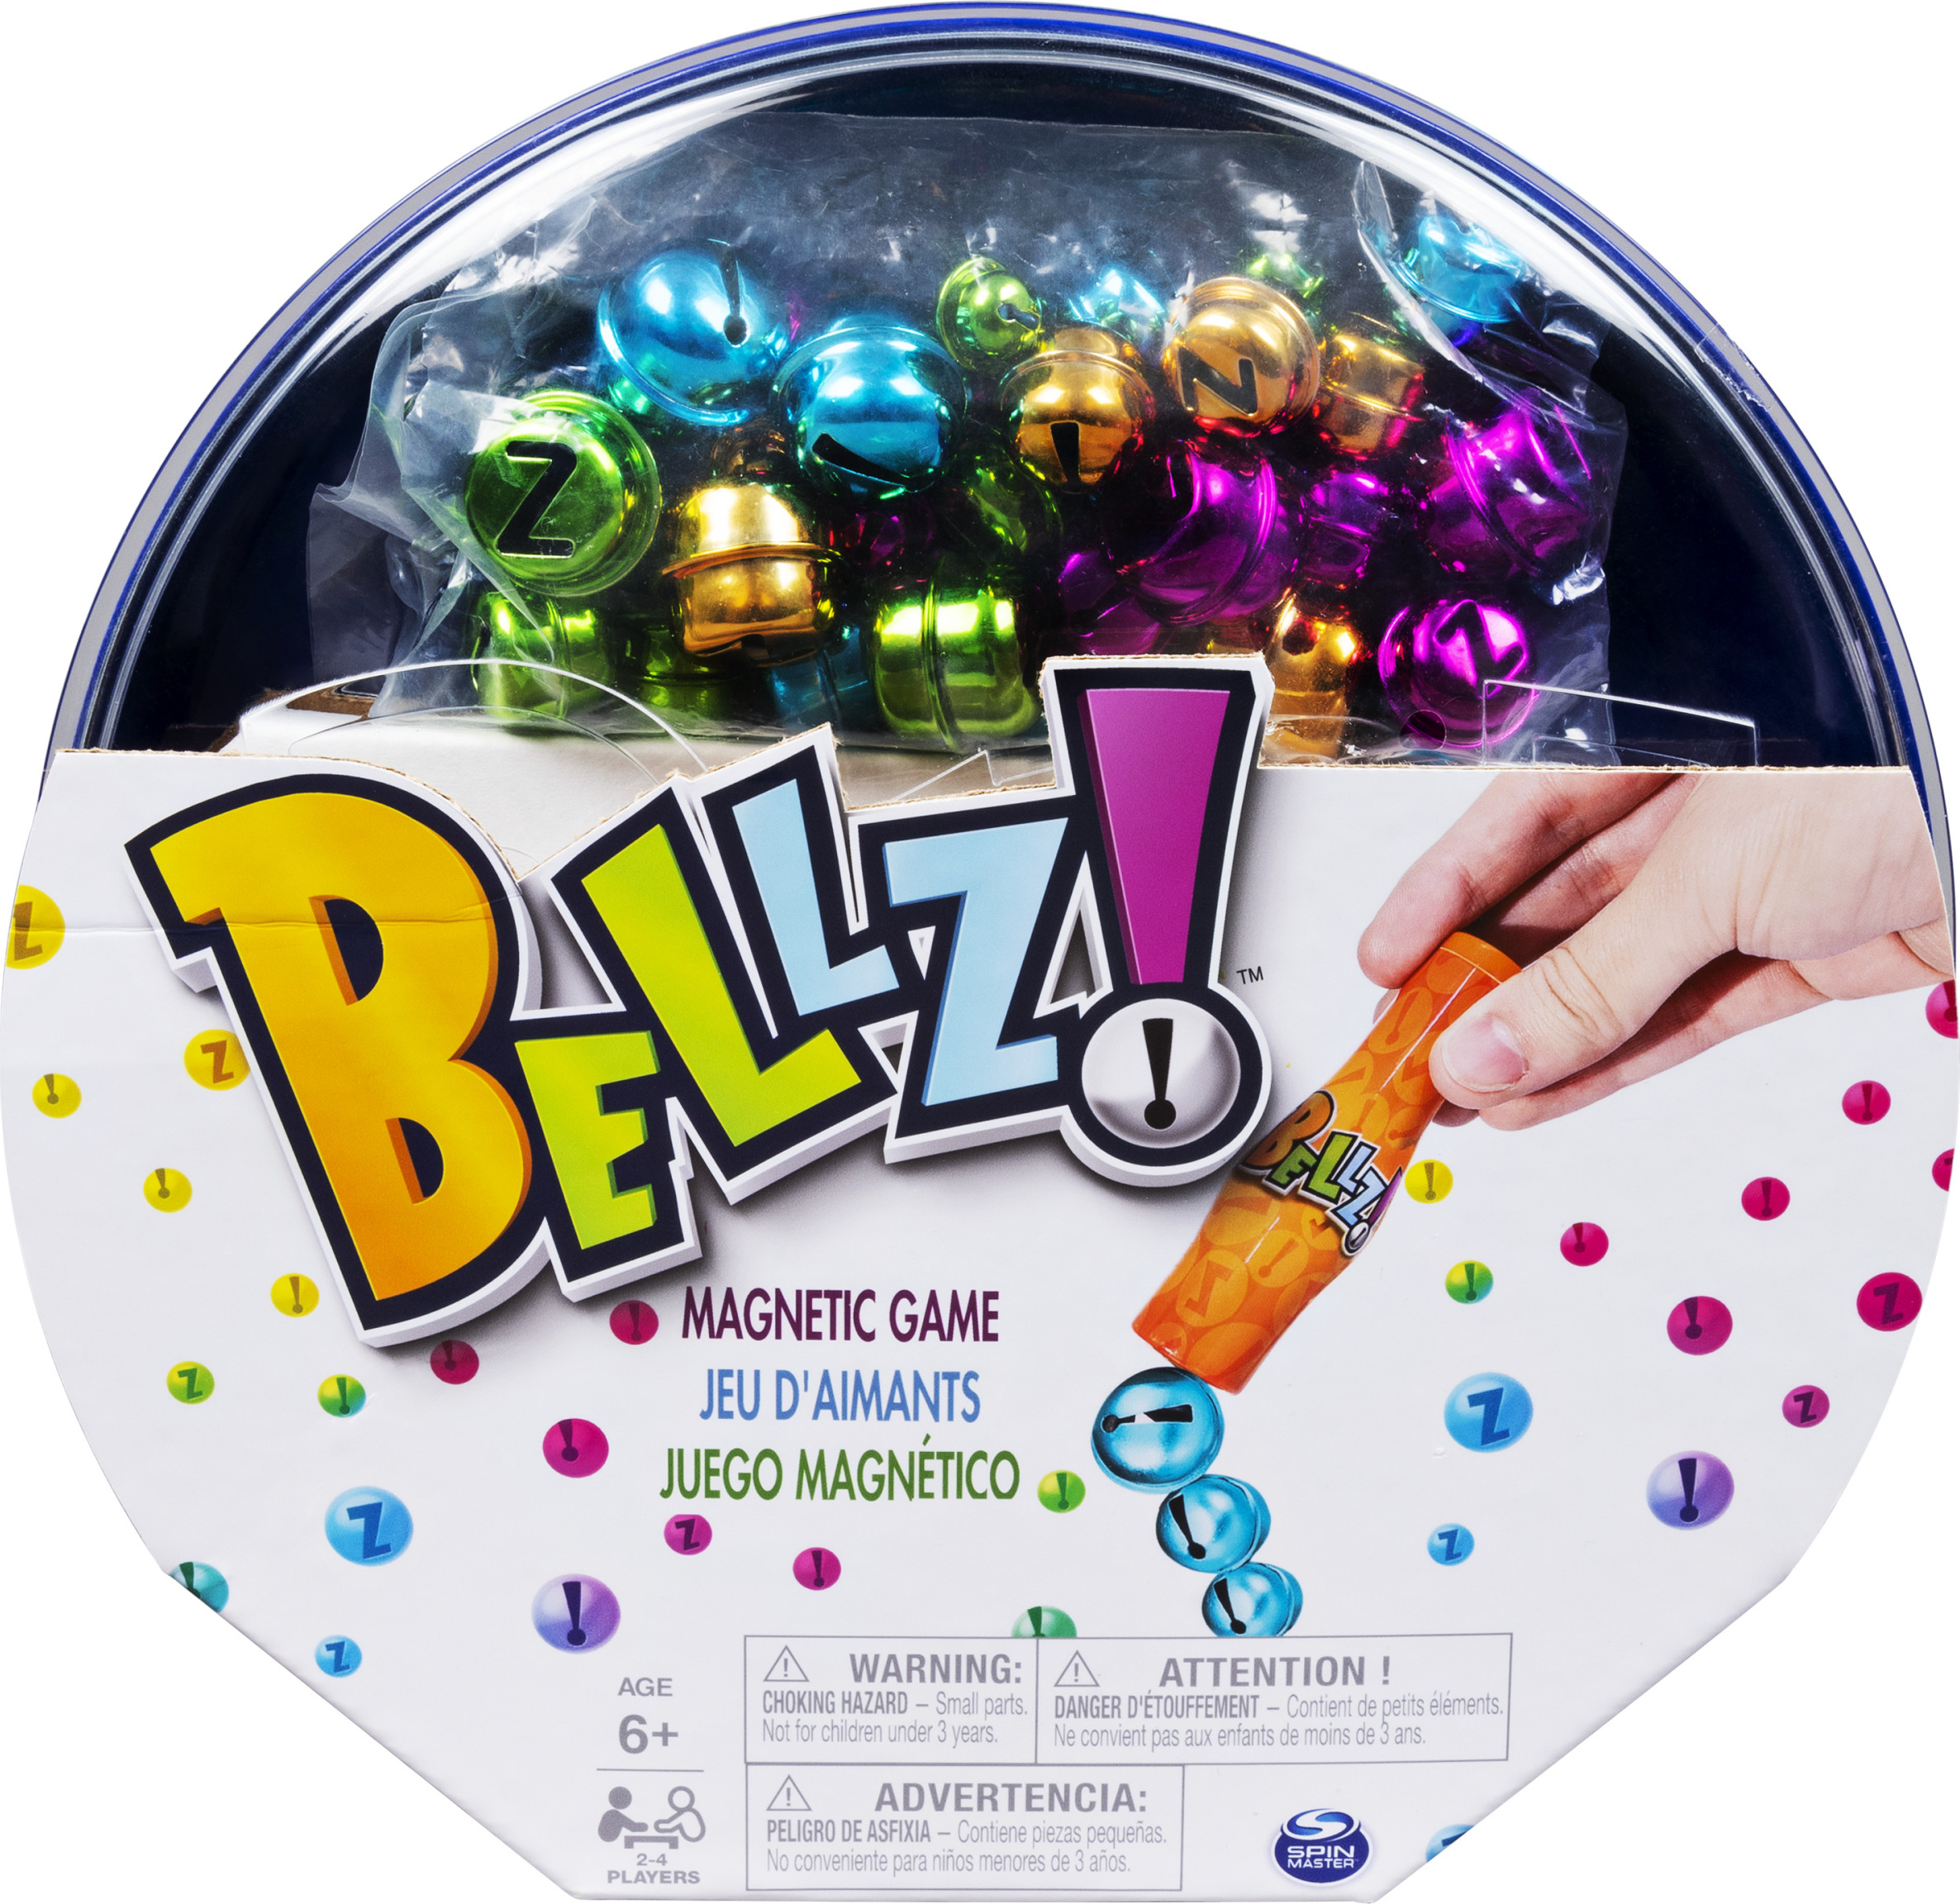 Bellz, Family Game with Magnetic Wand and Colorful Bells, for Kids aged 6 and Up - image 1 of 9